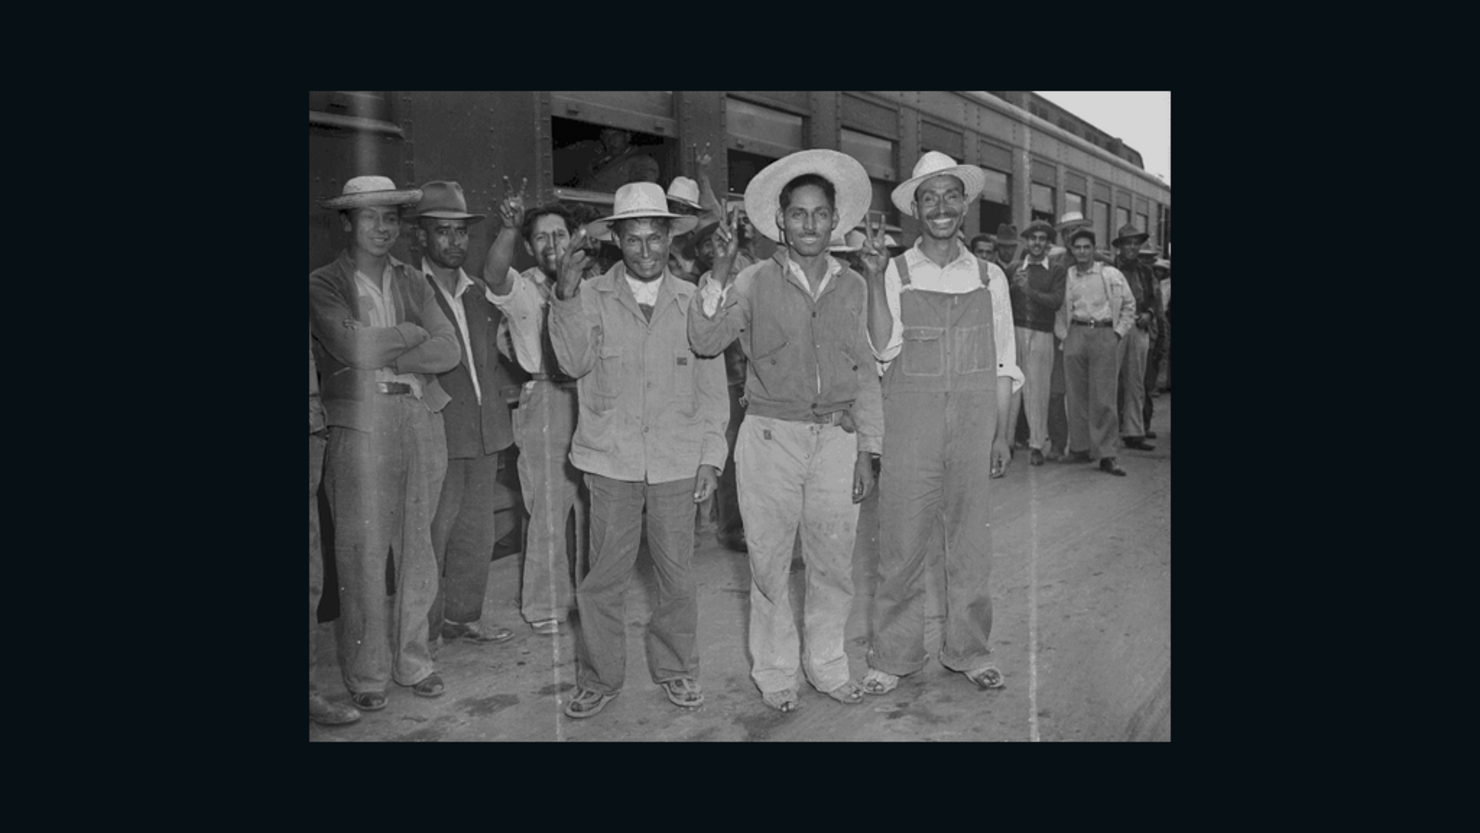 Between 1942 and 1964, agricultural workers came north from Mexico under the Bracero Program. 